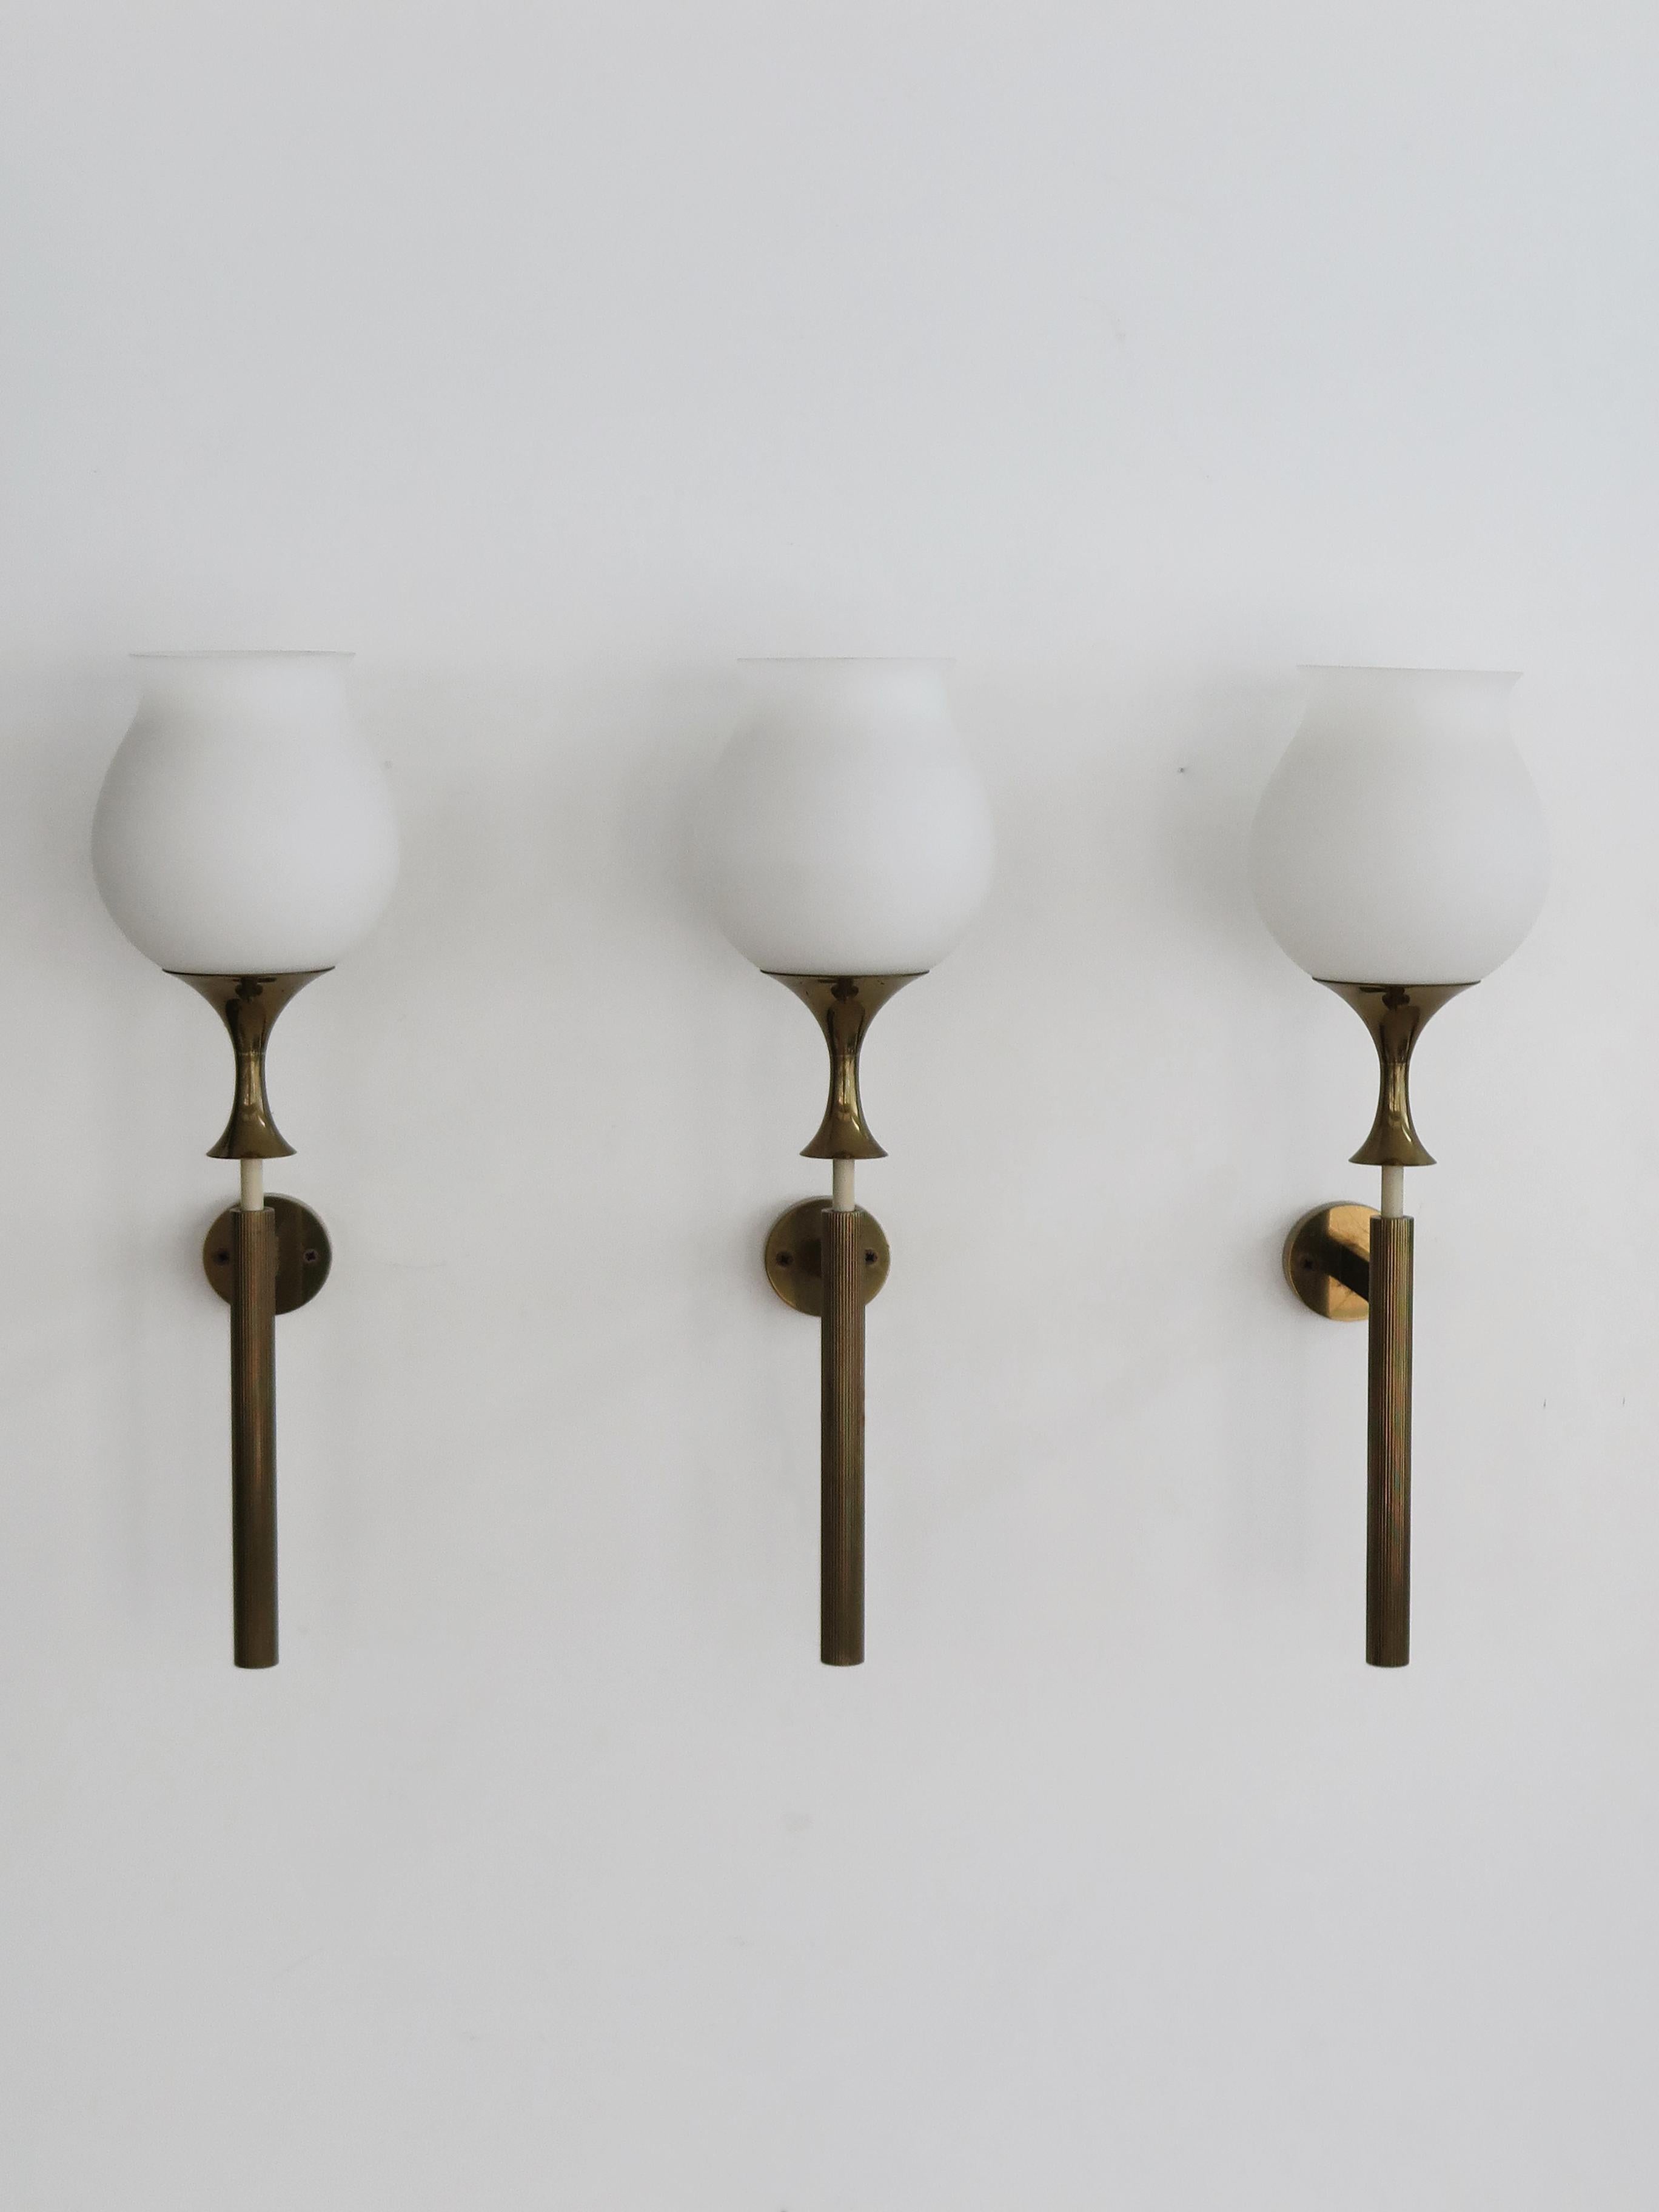 Mid-20th Century Angelo Lelii Italian Midcentury Glass Brass Sconces Wall Lamps Arredoluce 1950s For Sale